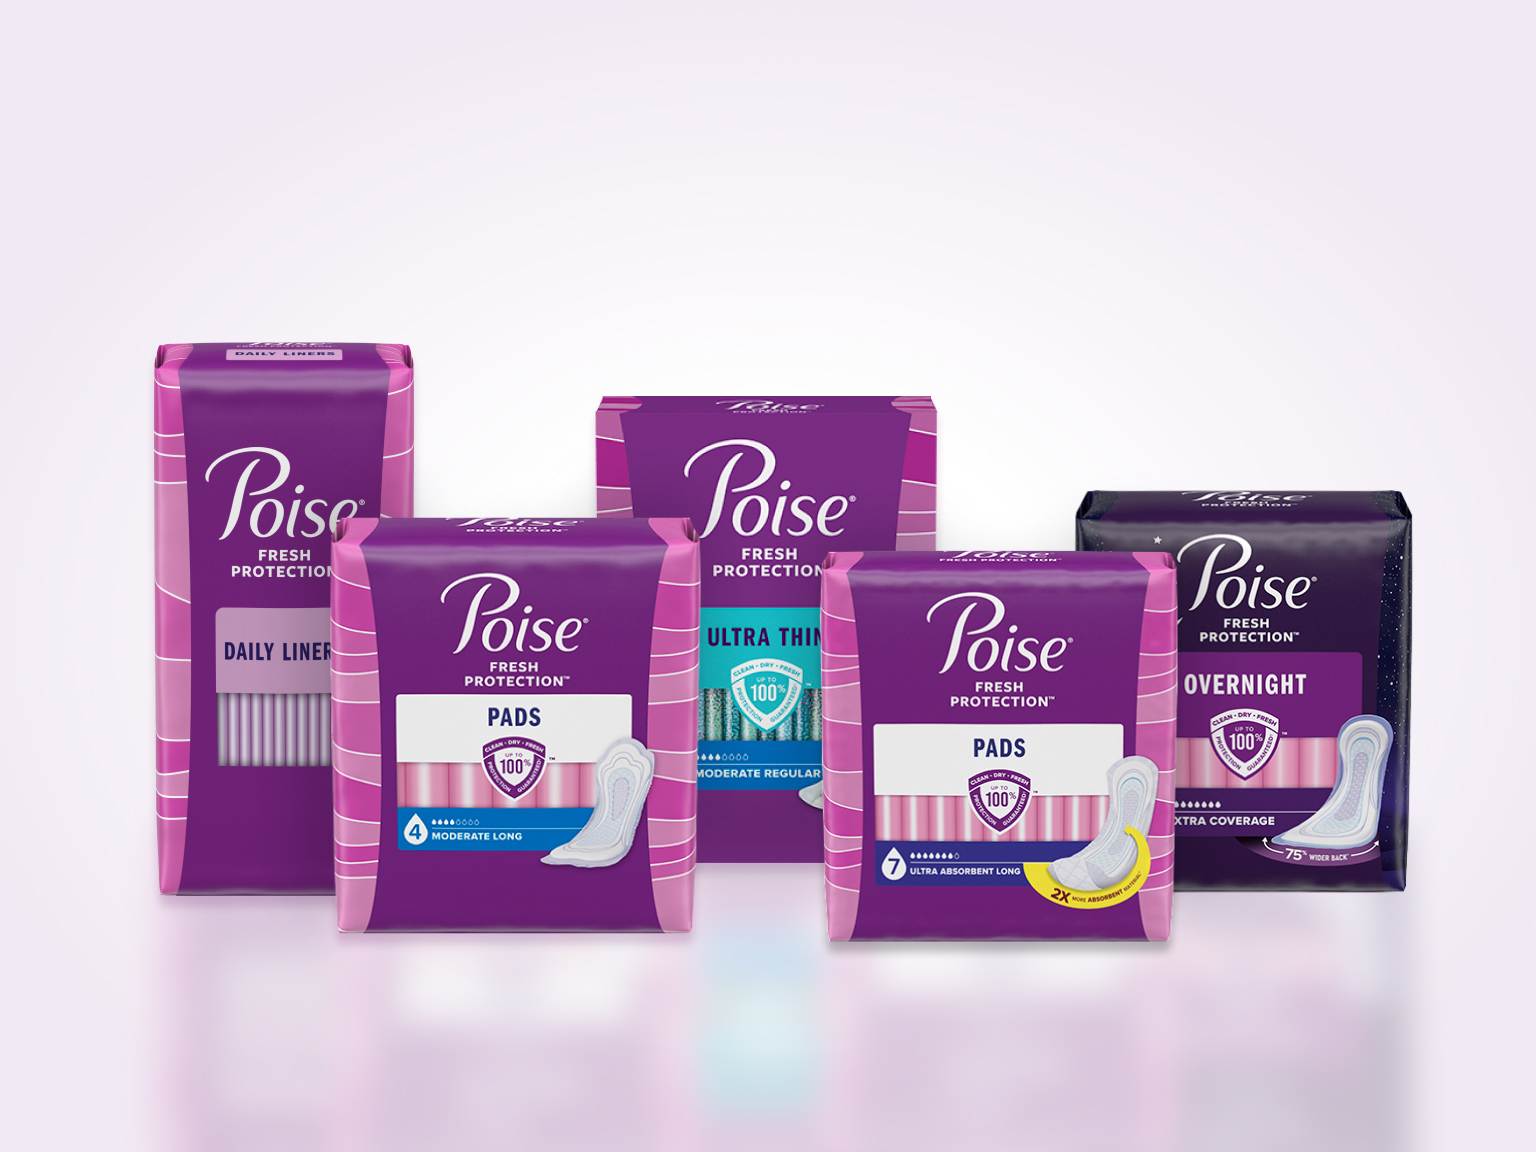 Poise® incontinence products for women